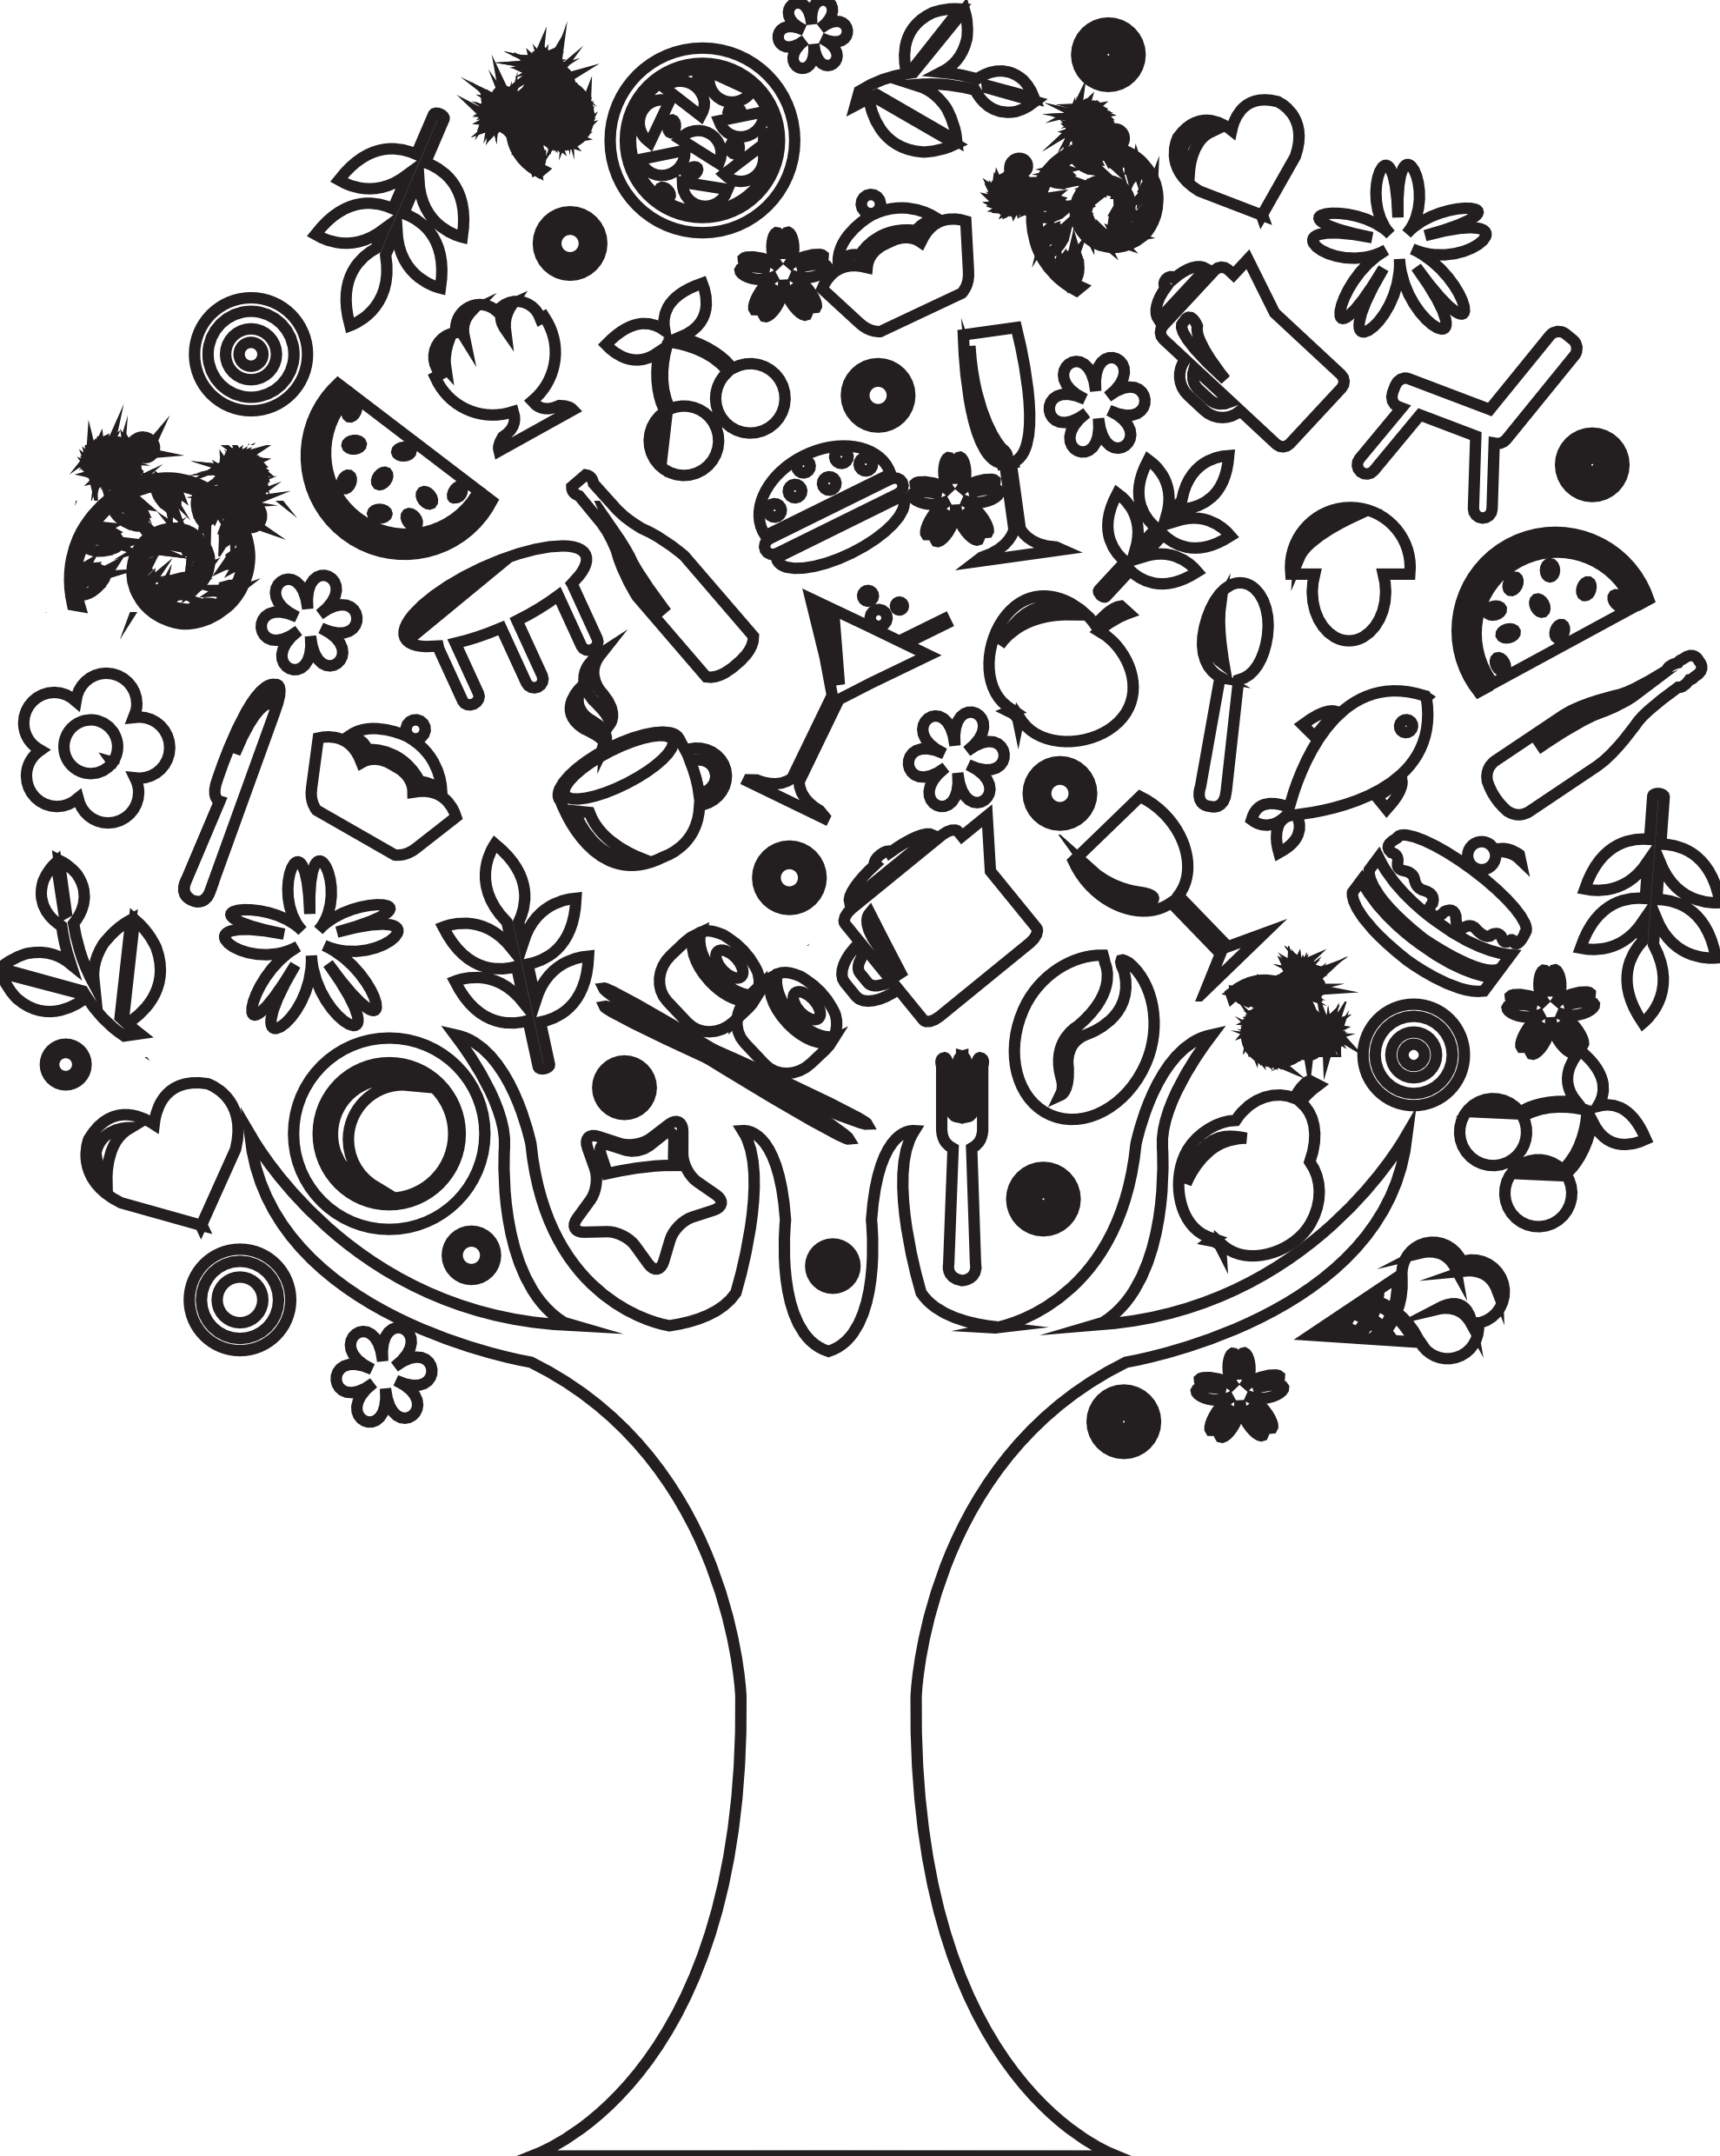 Free Tree Drawing Black And White, Download Free Tree Drawing Black And ...